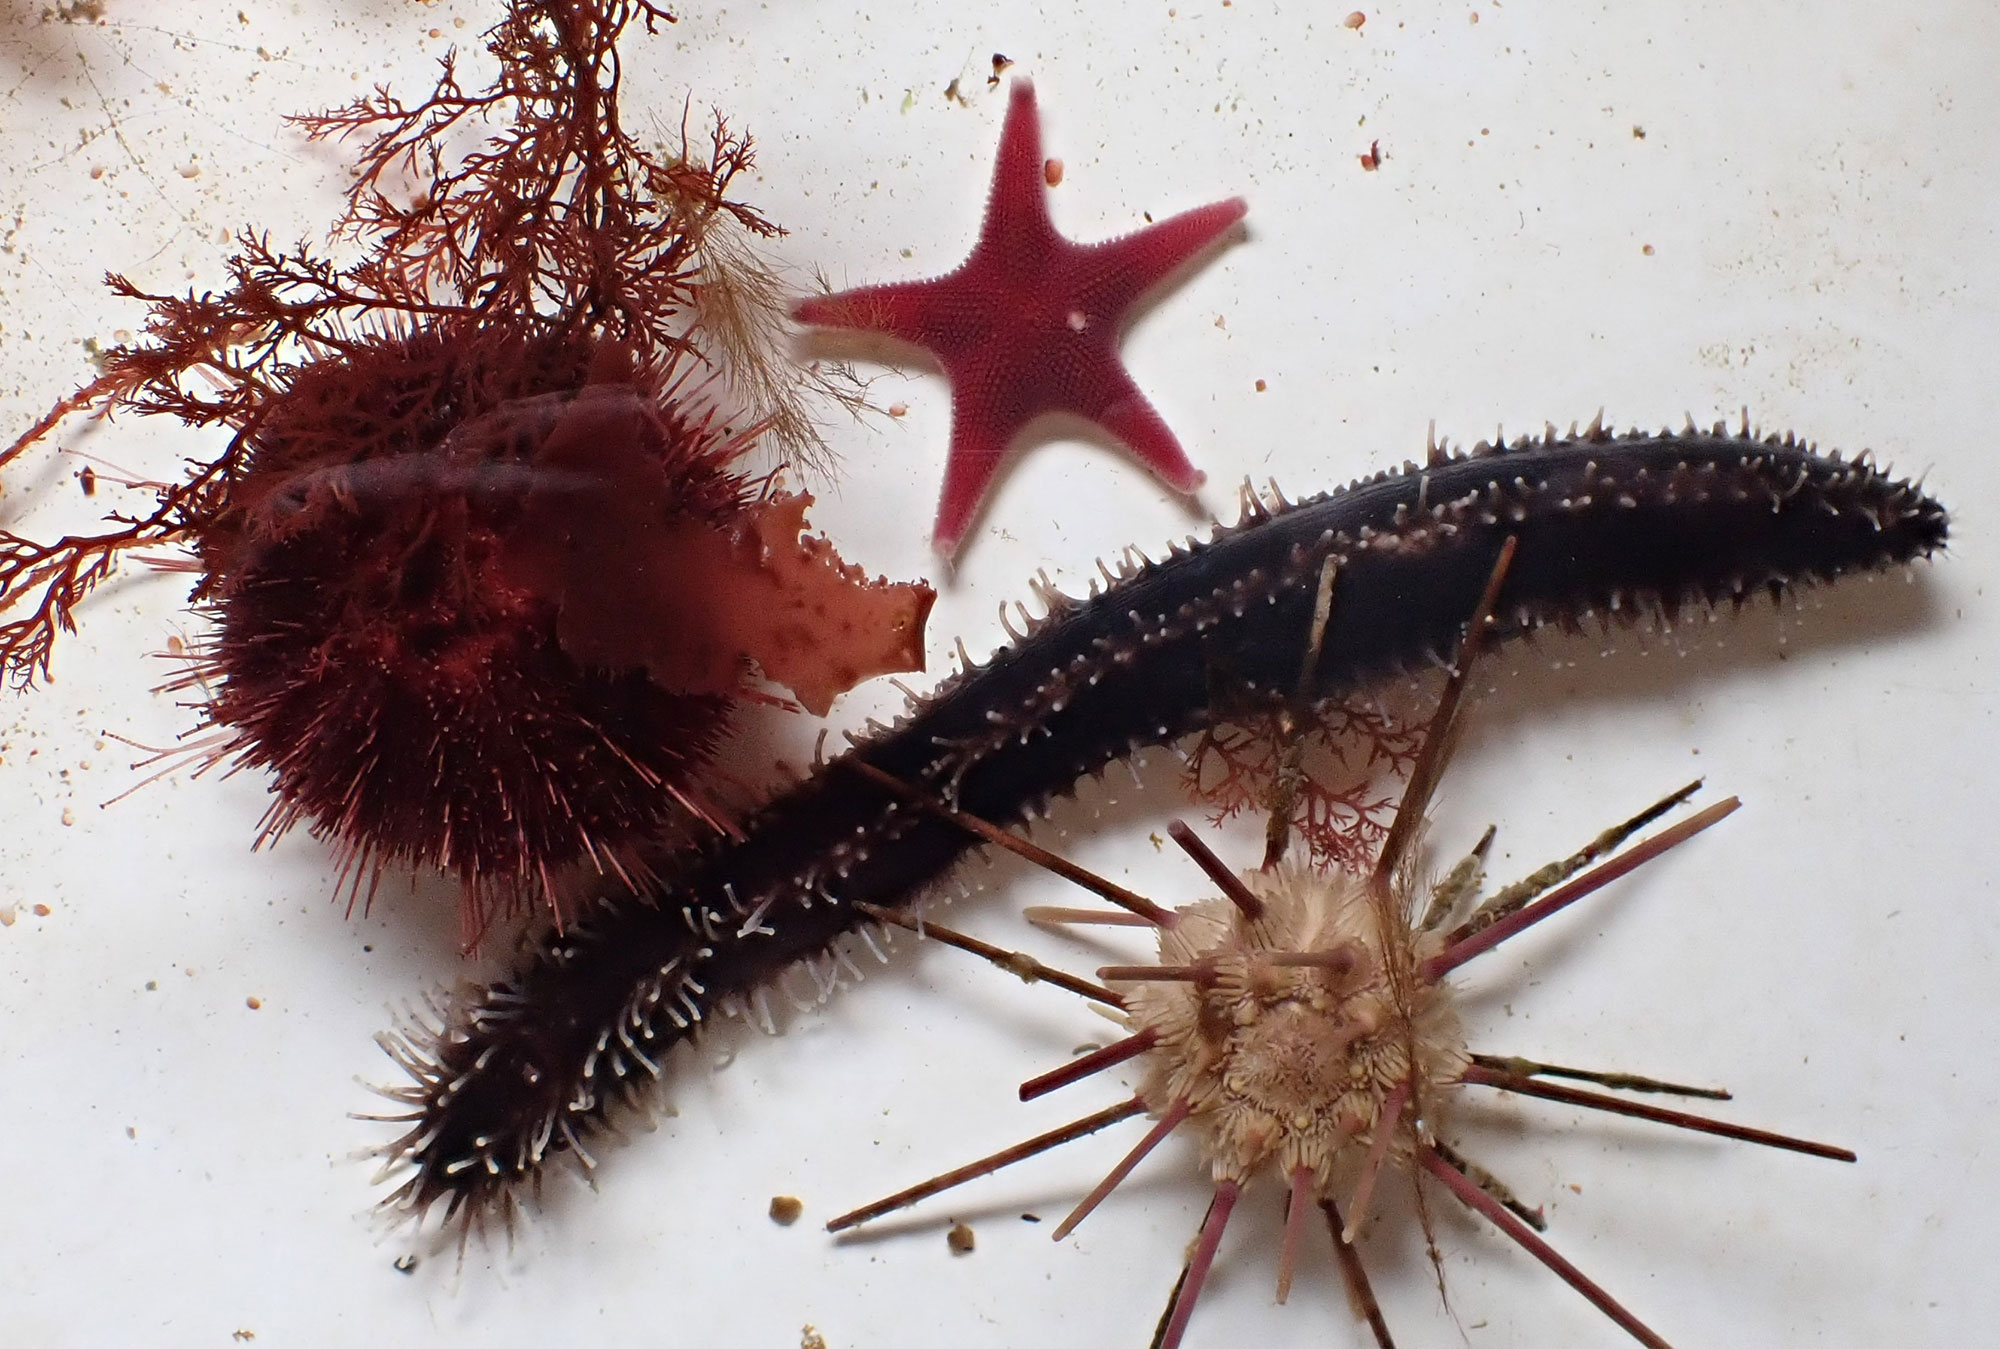 A five-armed purple sea star rests along a similarly colored short spined urchin partially covered in algae; below the pair stretching across the image a brownish sea cucumber and below a longer, less densely spined pencil urchin